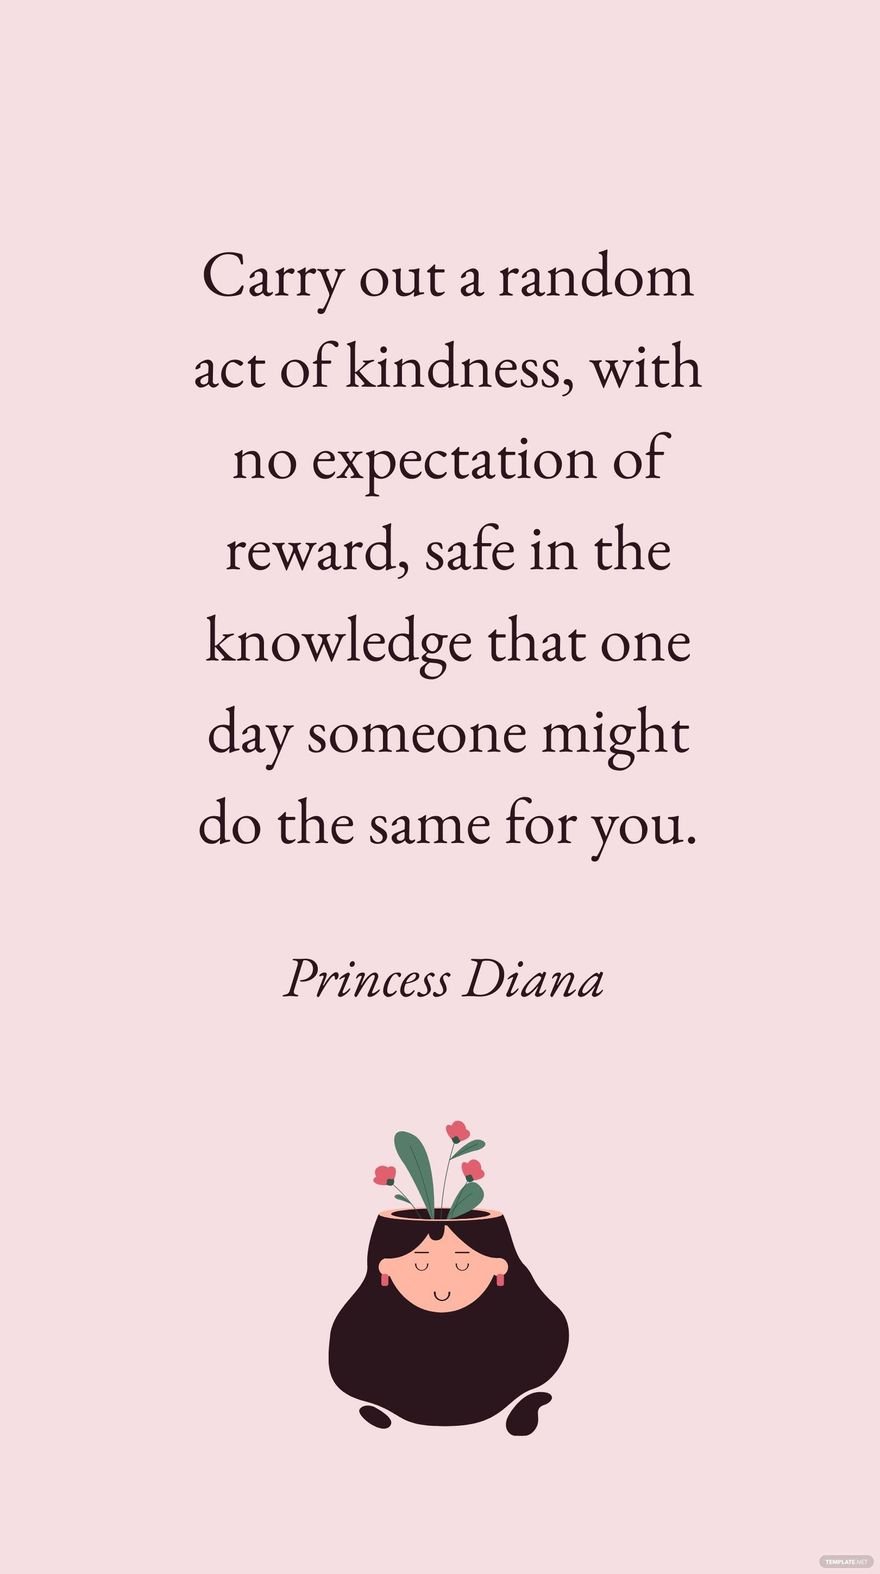 Free Princess Diana - Carry out a random act of kindness, with no expectation of reward, safe in the knowledge that one day someone might do the same for you. in JPG